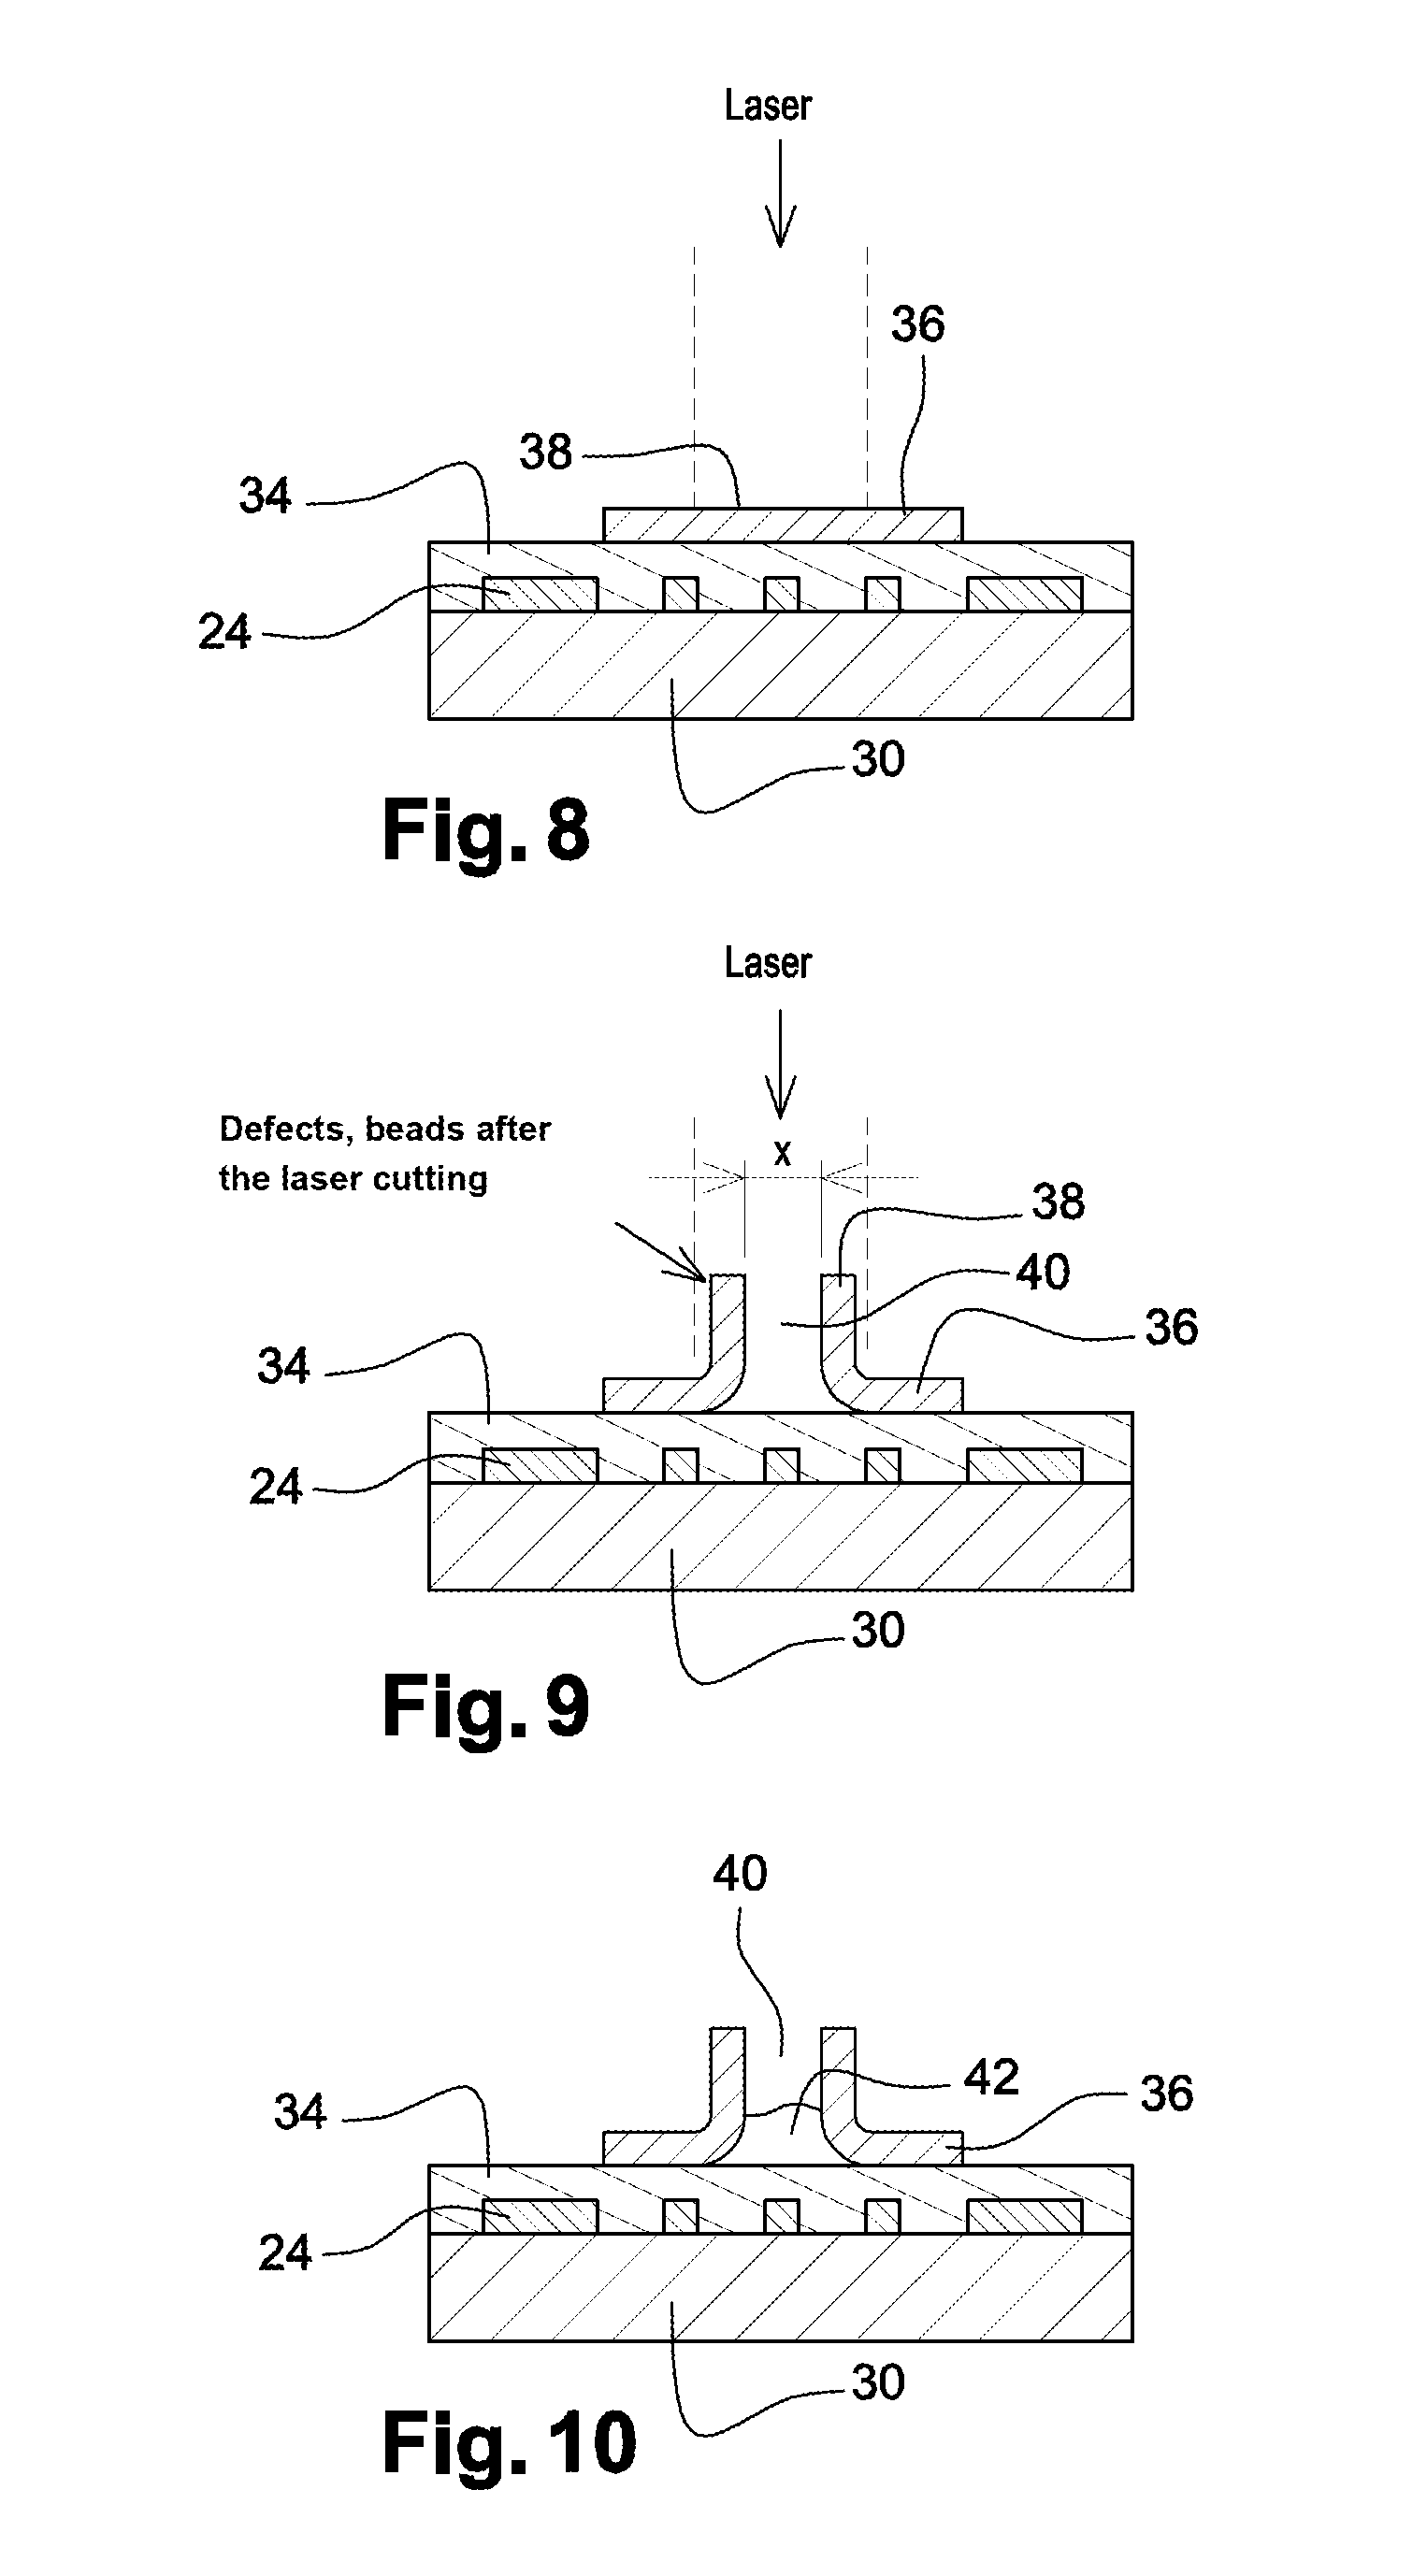 Flip-chip hybridization of microelectronic components by local heating of connecting elements